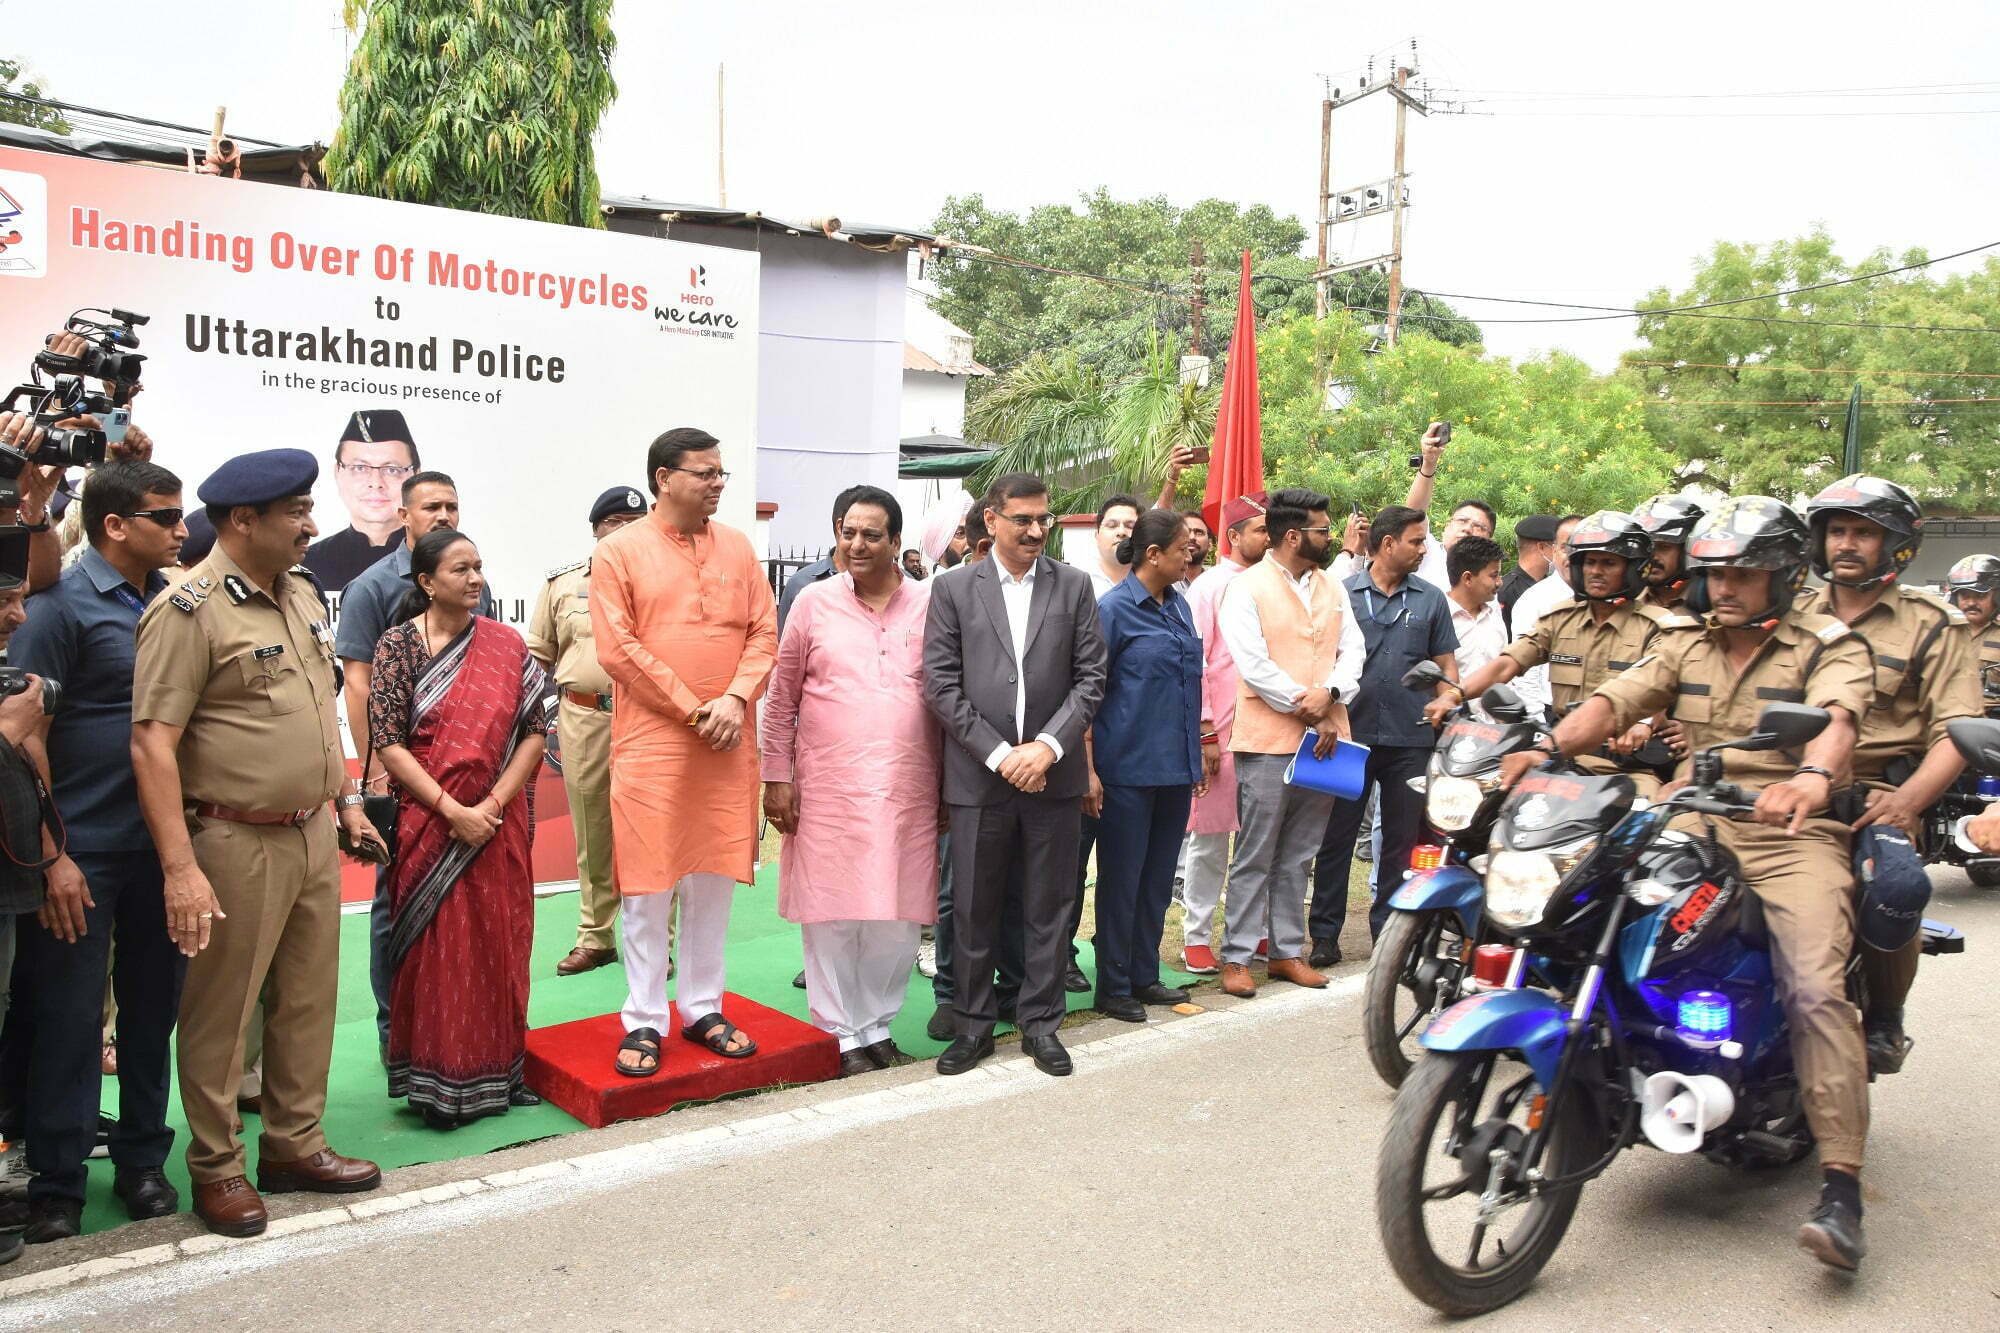 150 Hero Motorcycles Given To Uttarakhand Police Department